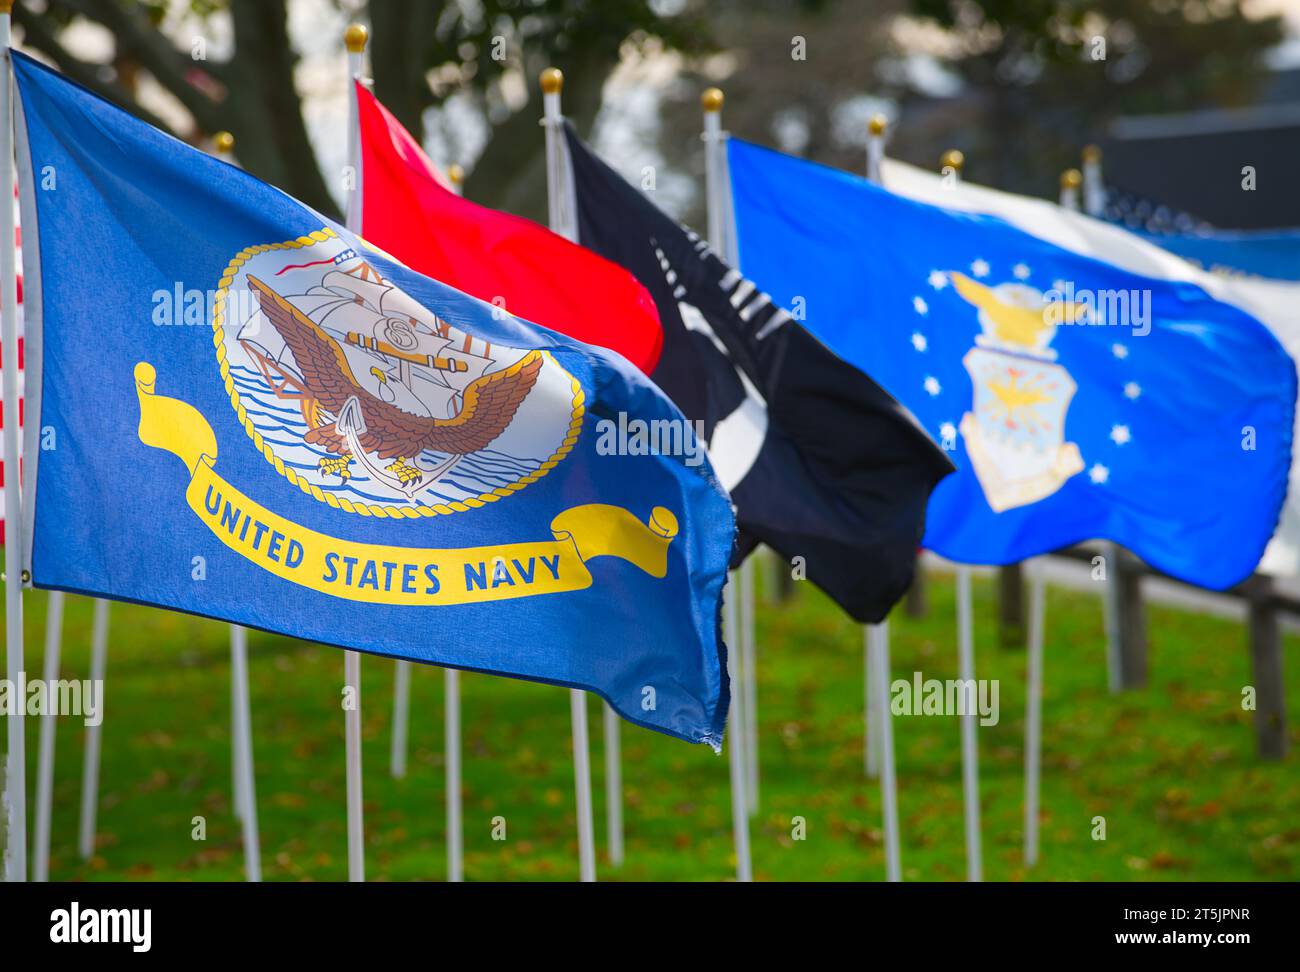 Flags representing the various US Armed Forces flying in Dennis, Massachusetts, on Cape Cod.   For Veteran's Day. Stock Photo